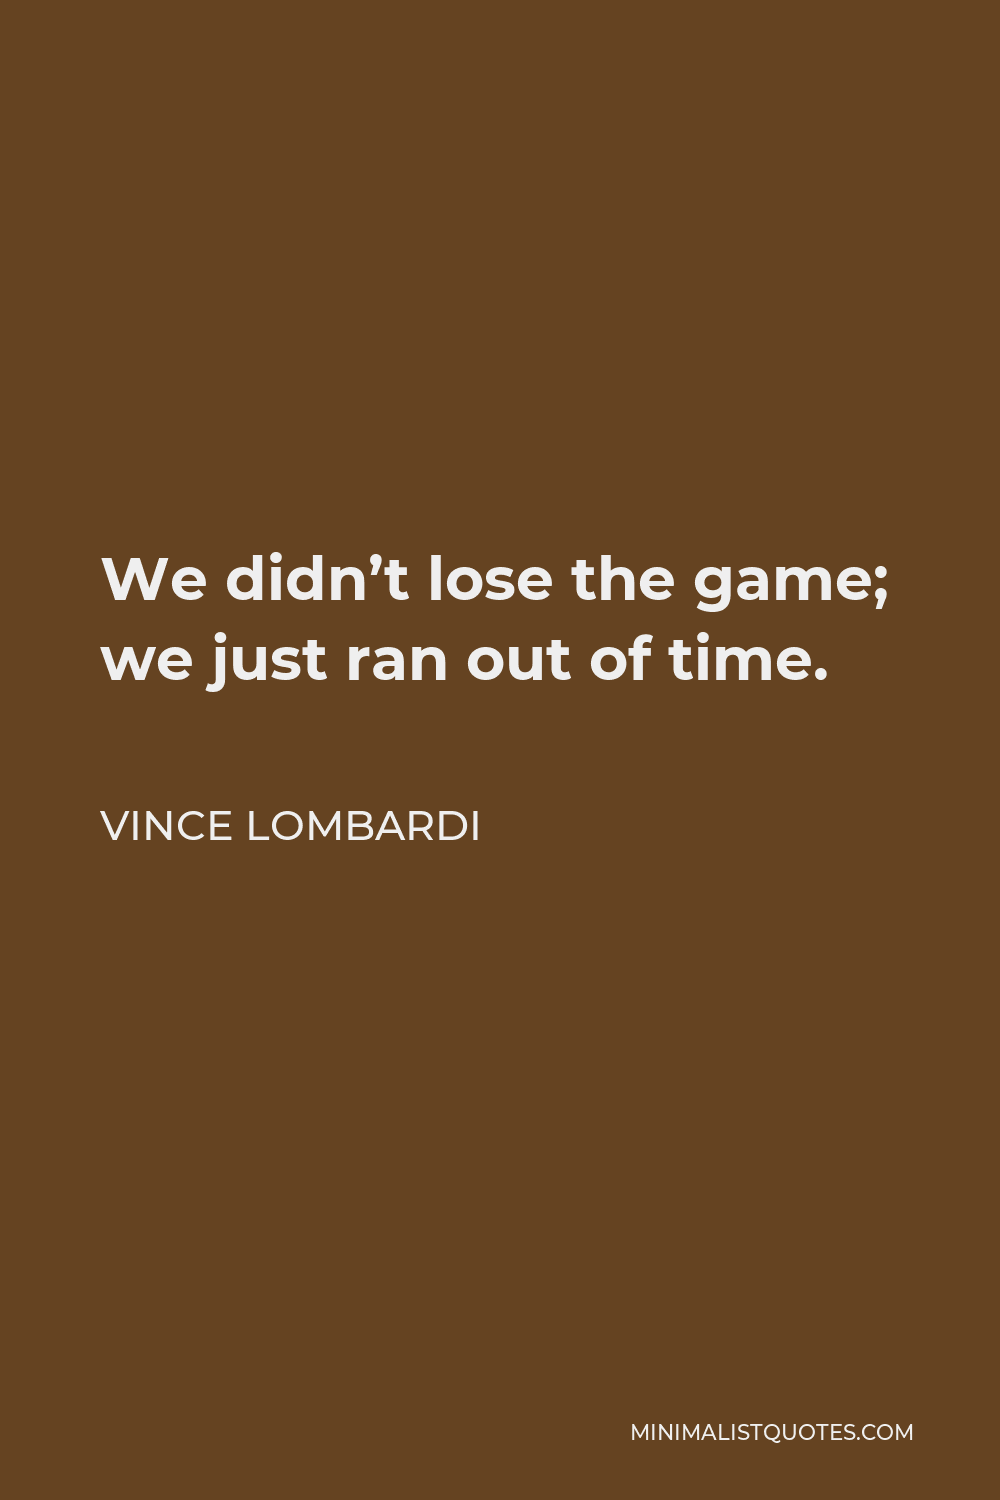 Vince Lombardi Quote - We didn’t lose the game; we just ran out of time.